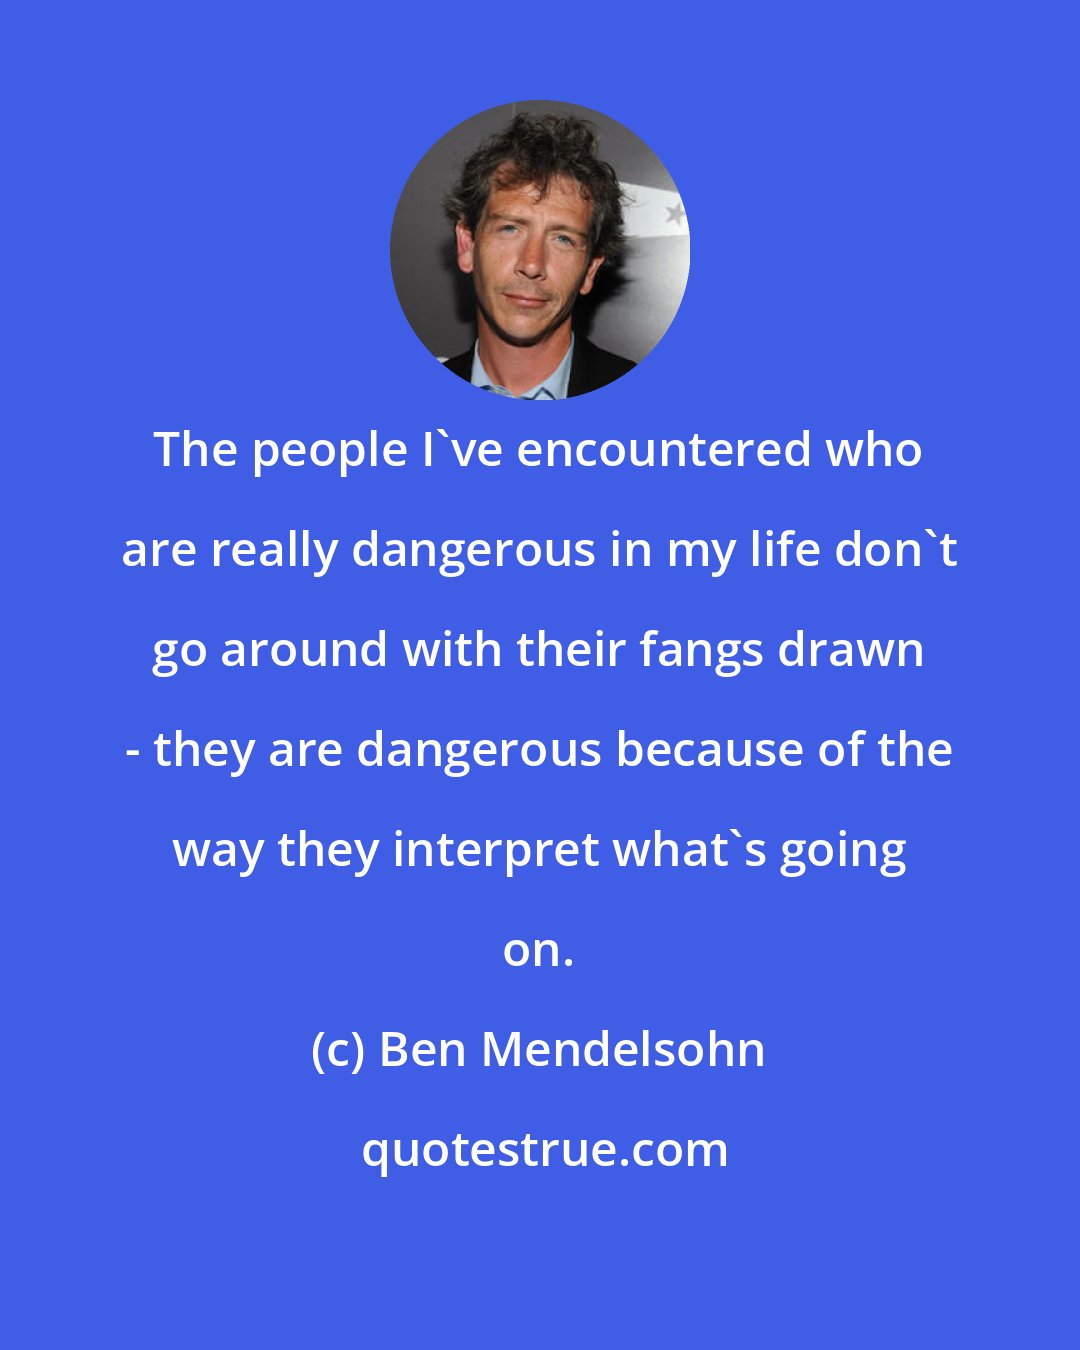 Ben Mendelsohn: The people I've encountered who are really dangerous in my life don't go around with their fangs drawn - they are dangerous because of the way they interpret what's going on.